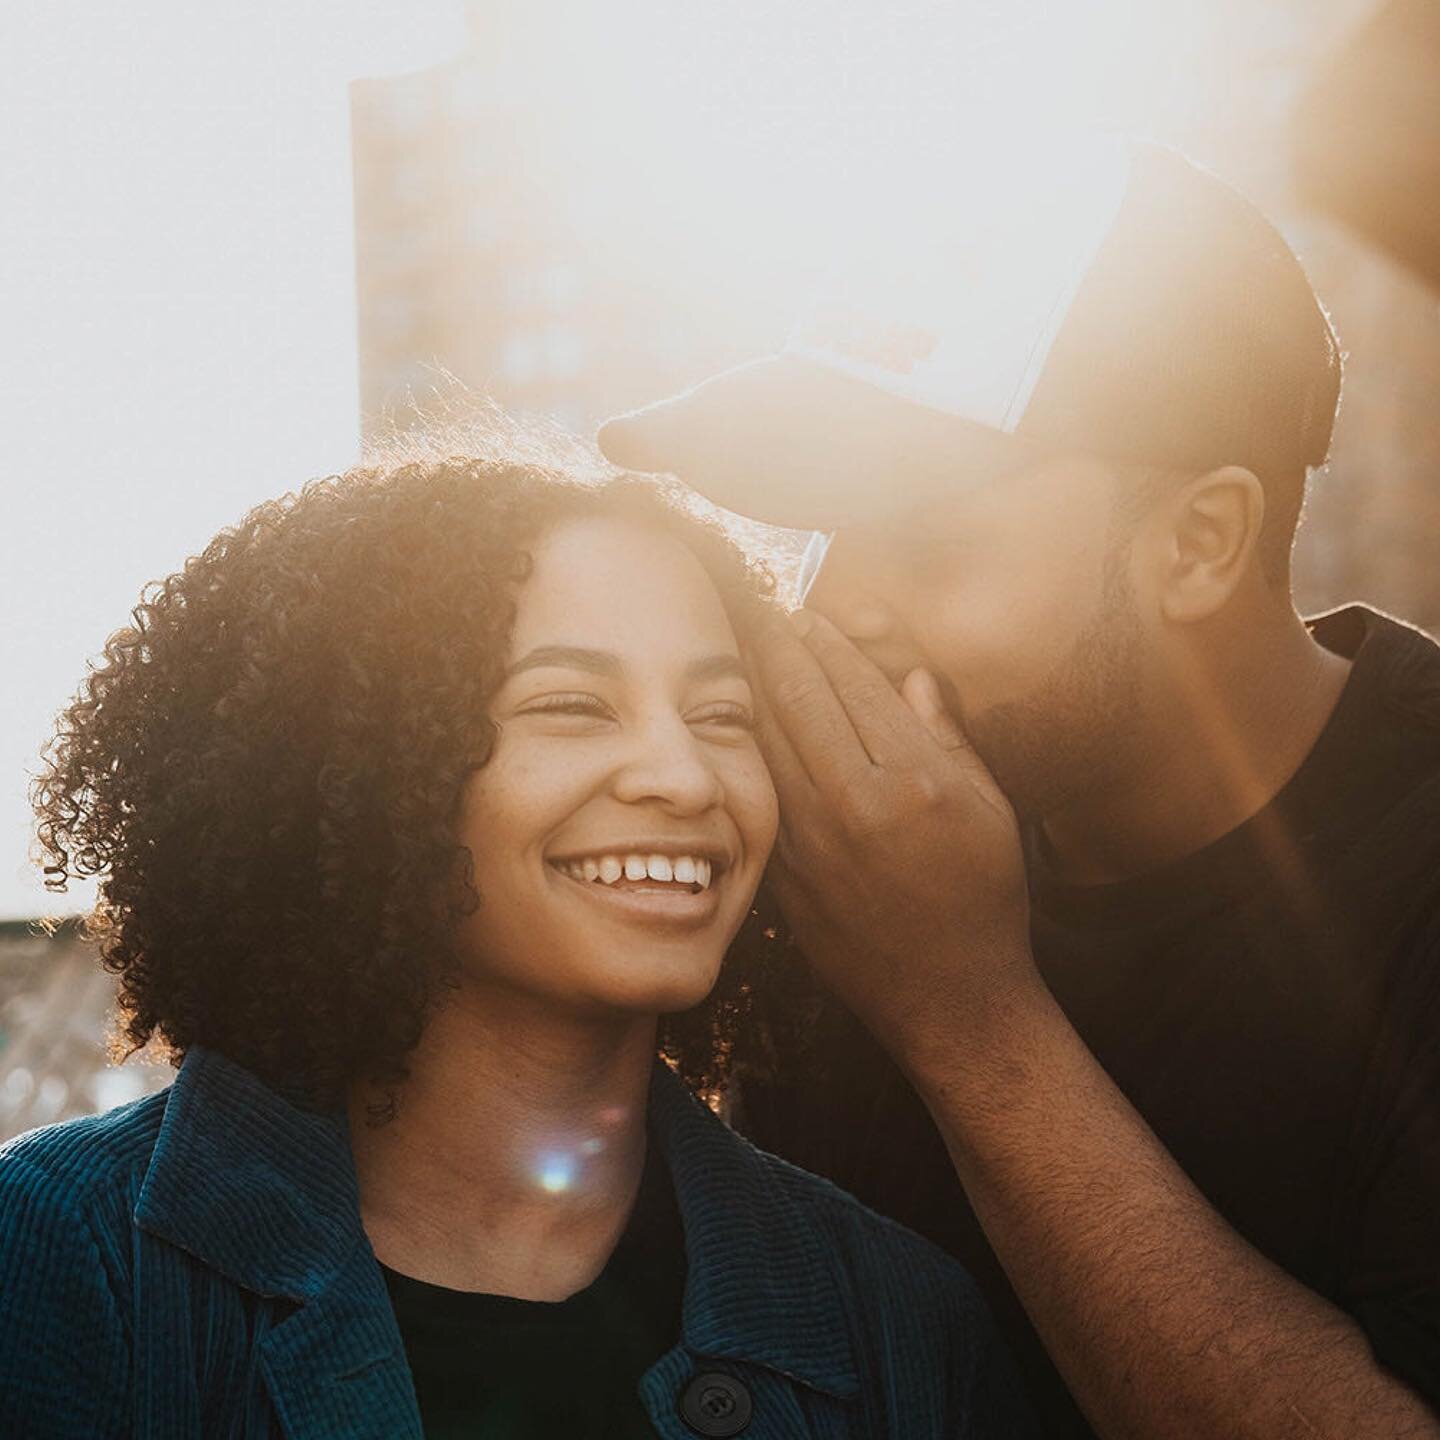 the sun has awoken from its slumber to shine it&rsquo;s gorgeous golden light on my couples. ⁣
⁣
lol that was a corny statement but i mean cmon bro. just swipe through the photos and tell me that sunlight isn&rsquo;t killerrrrrr??? plus, demetri &amp